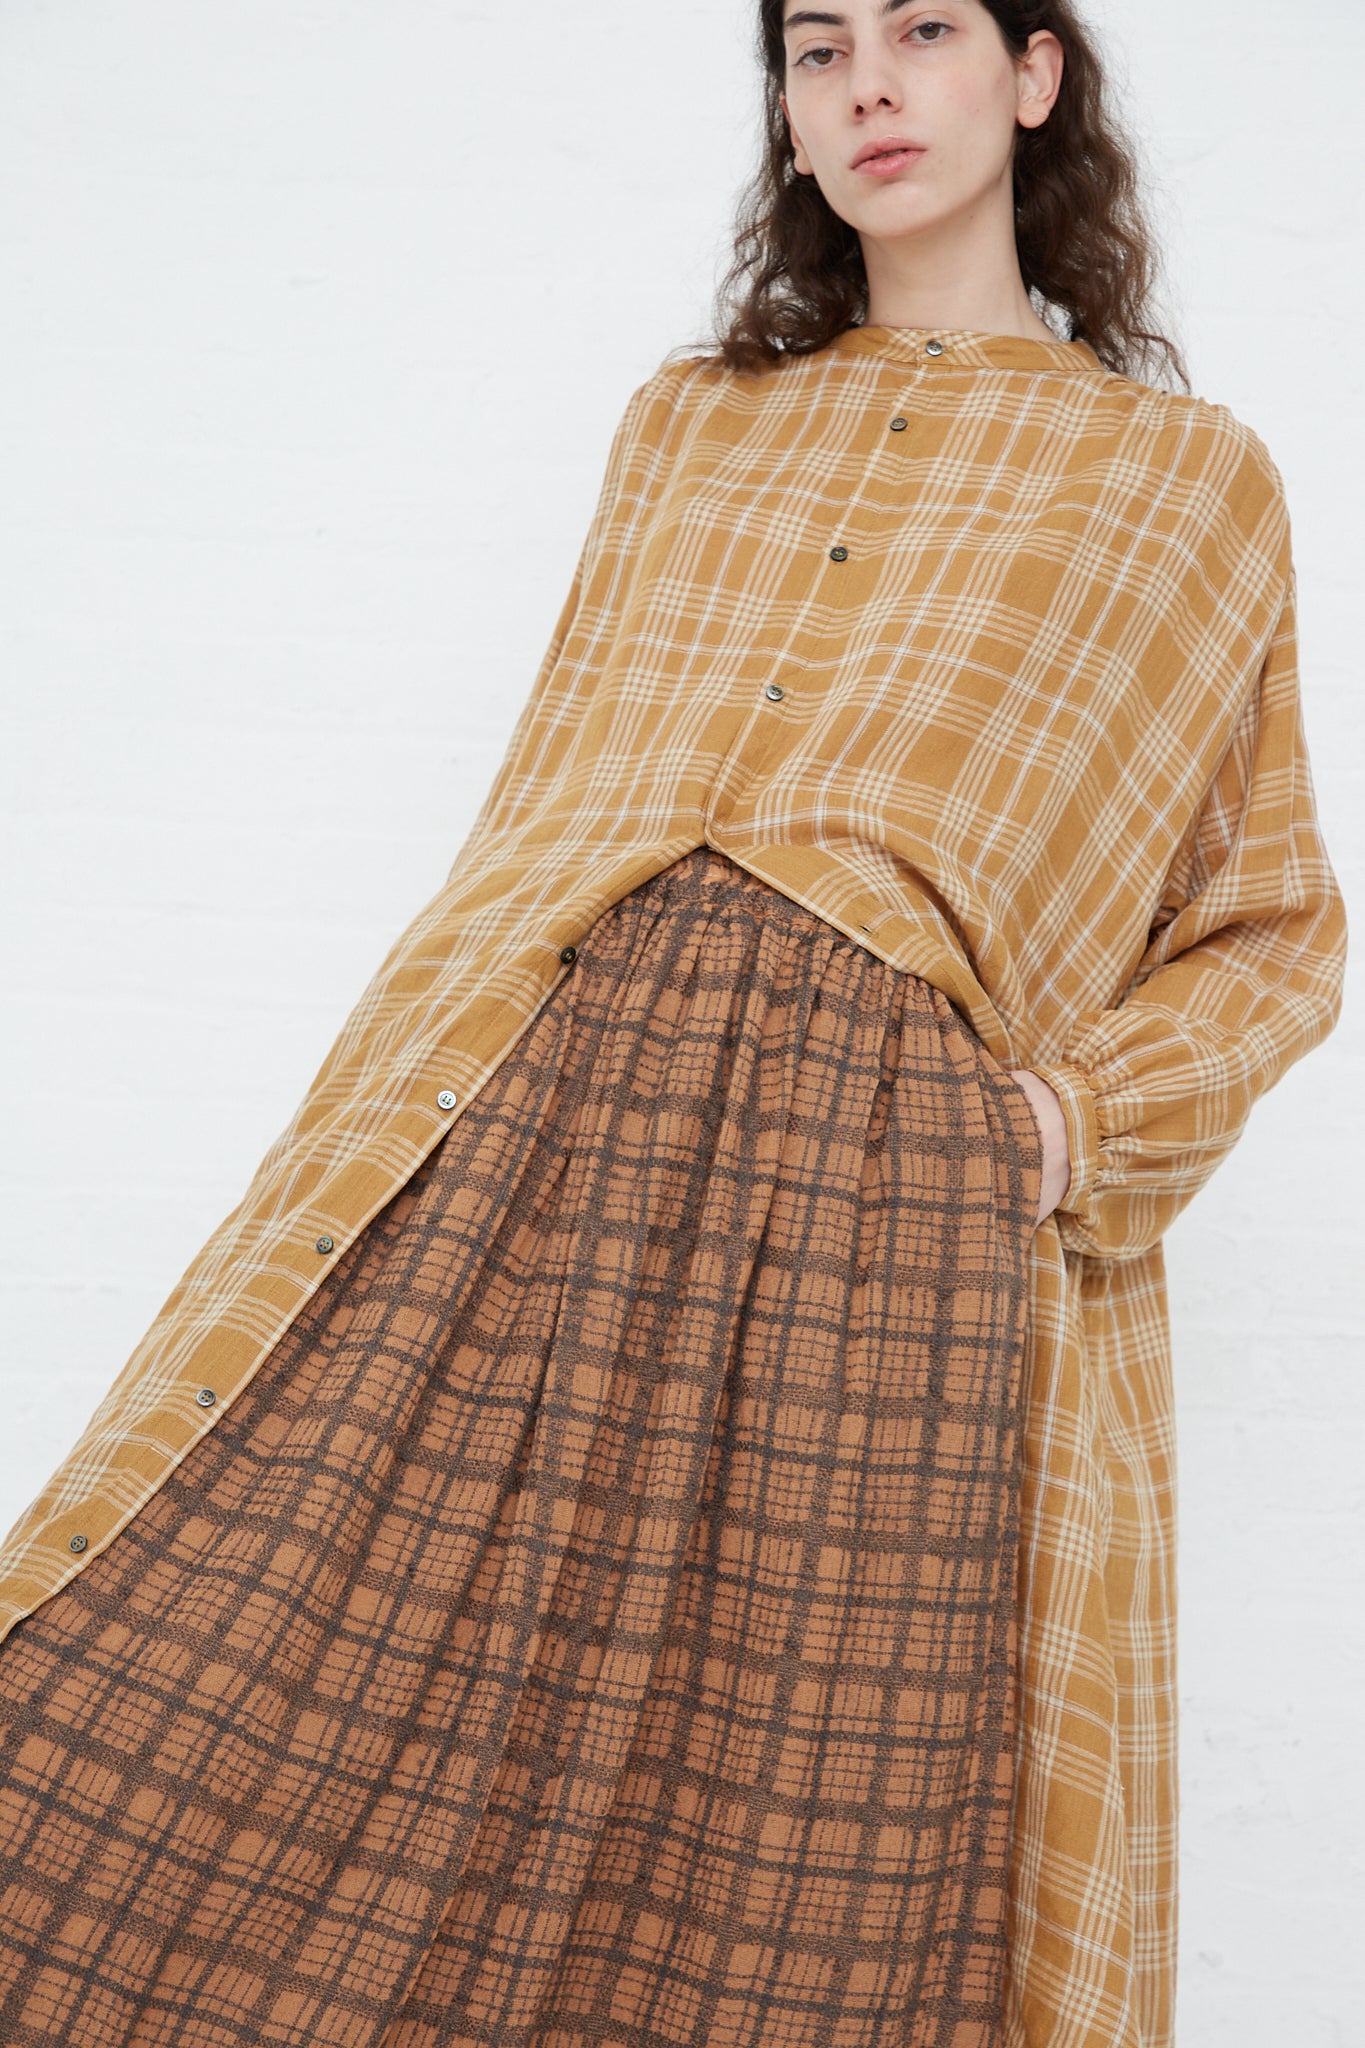 A model wearing the Linen Check Dress in Camel by Ichi Antiquités with relaxed fit.